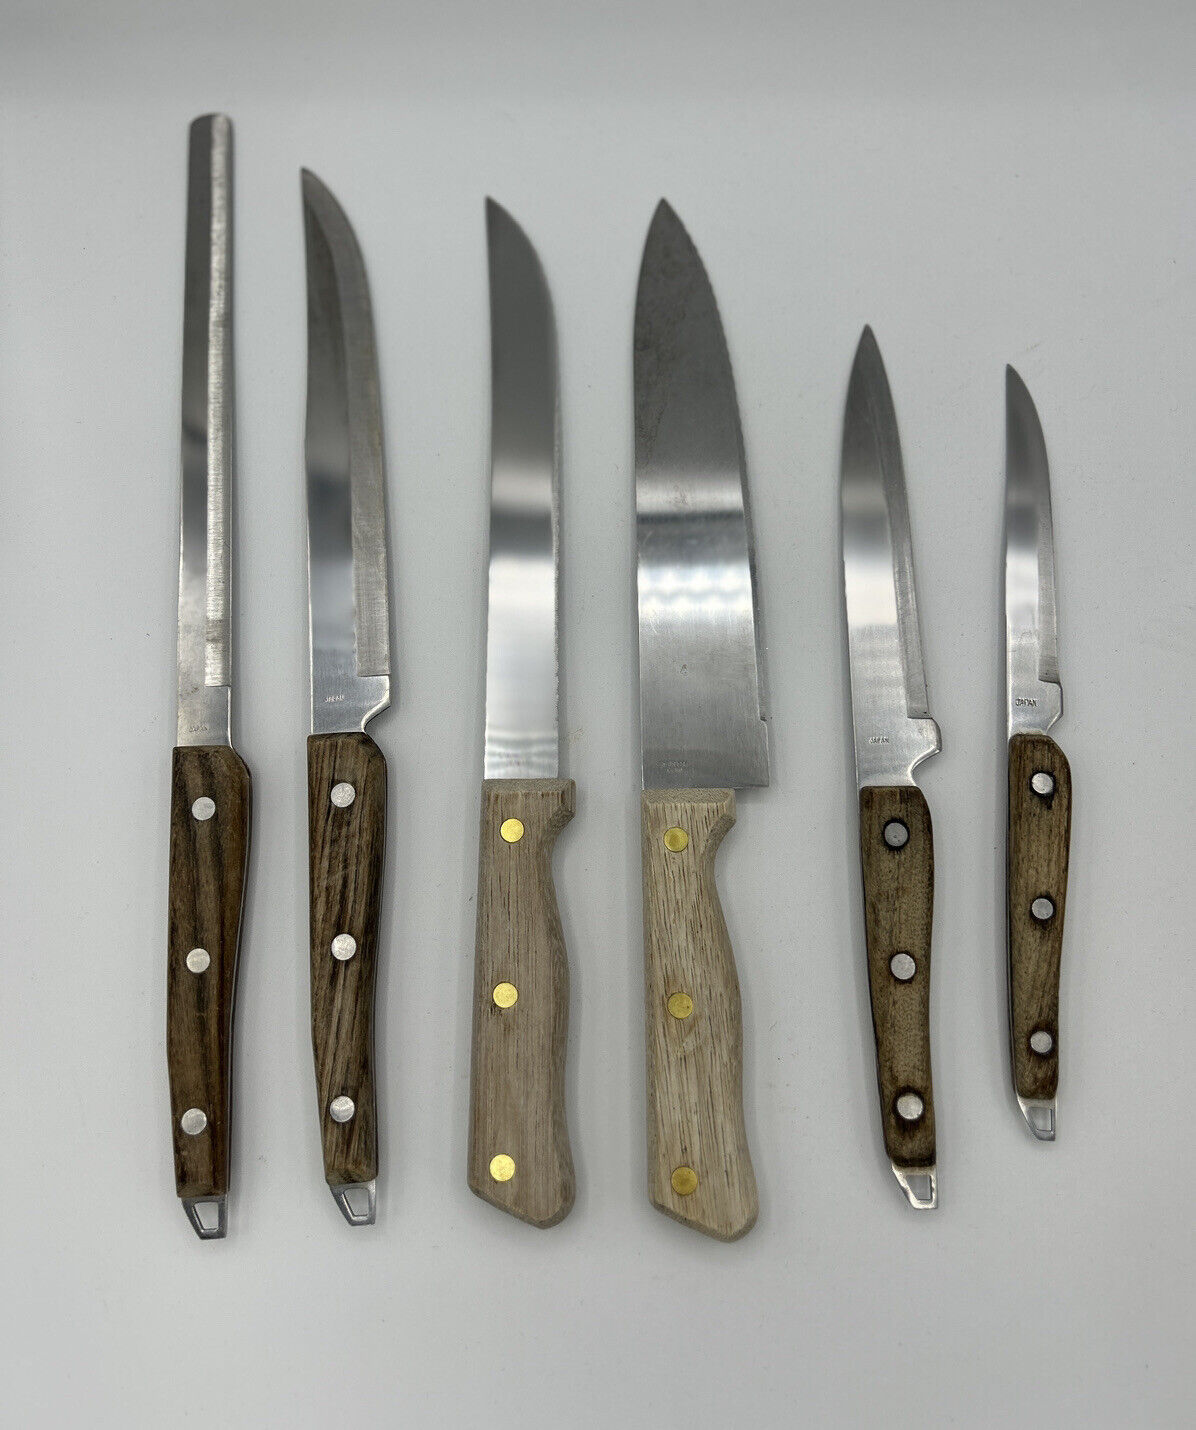 Vintage Japanese Stainless Steel Knives 6”-9” Kitchen/Cutting Knife Set 6 Piece